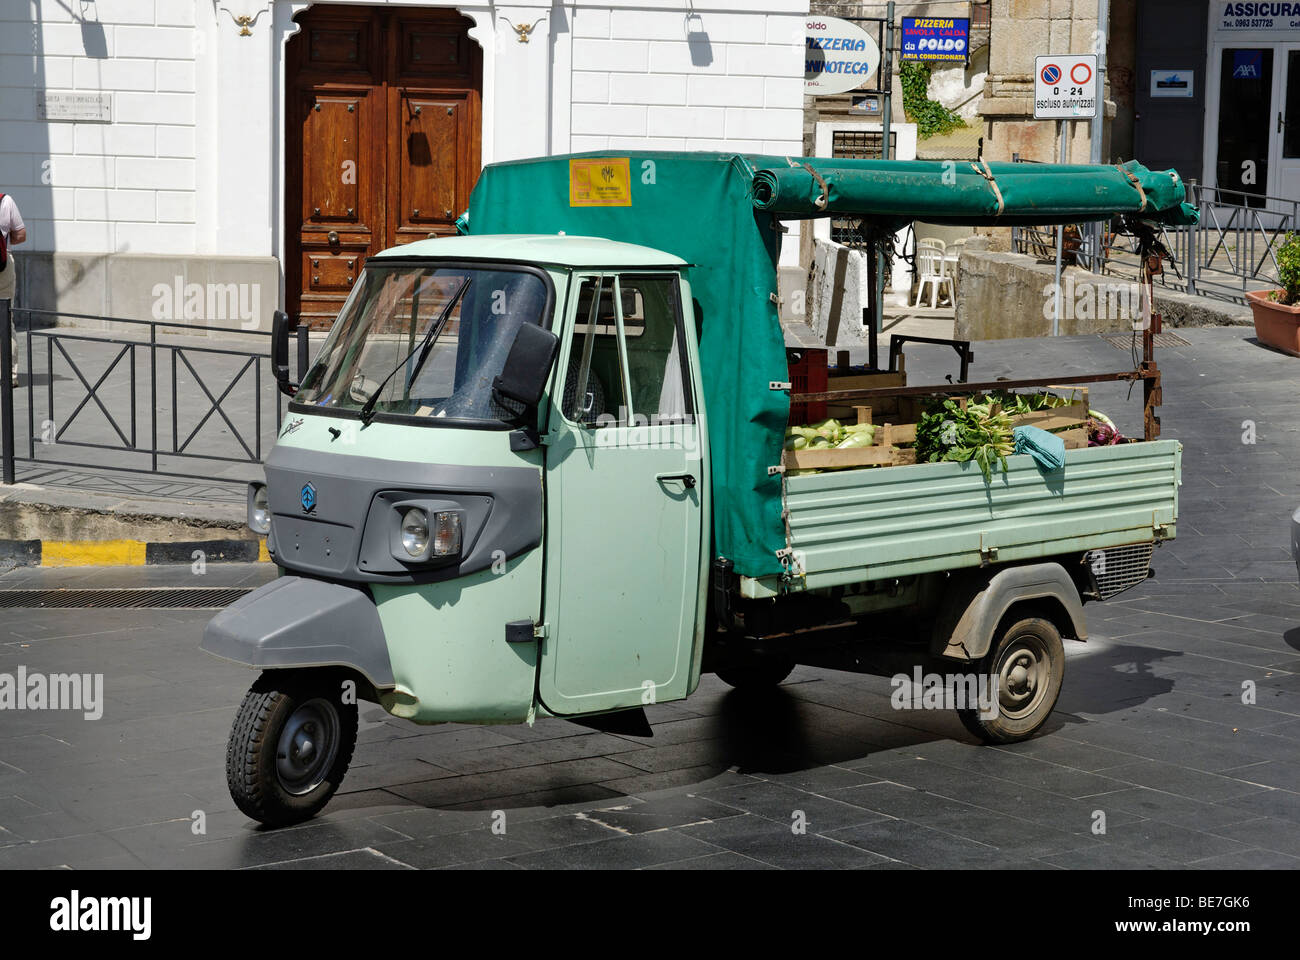 Chariot tricycle, Pizzo, Calabre, Italie, Europe Banque D'Images